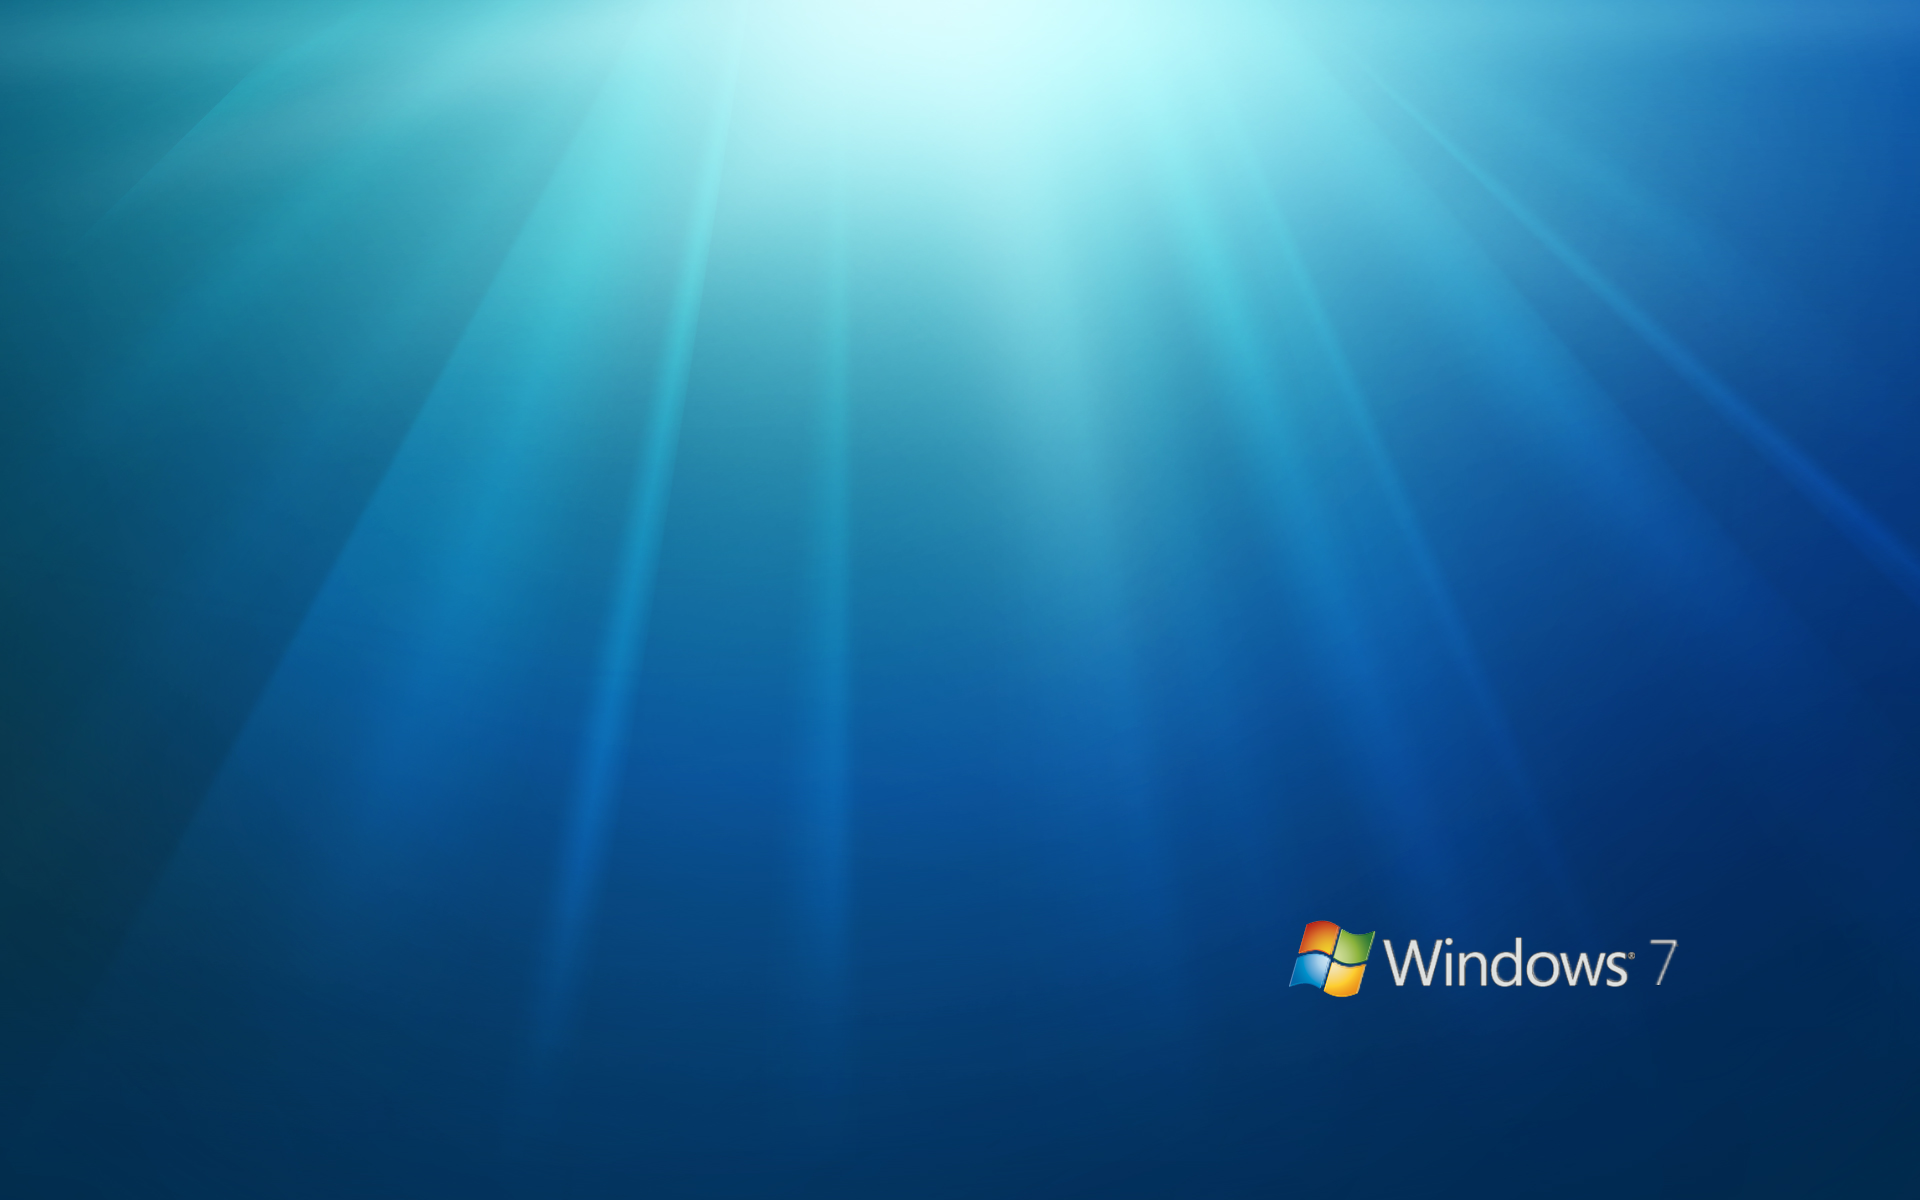 Windows 7 Wallpaper with Logo from PDC 2008